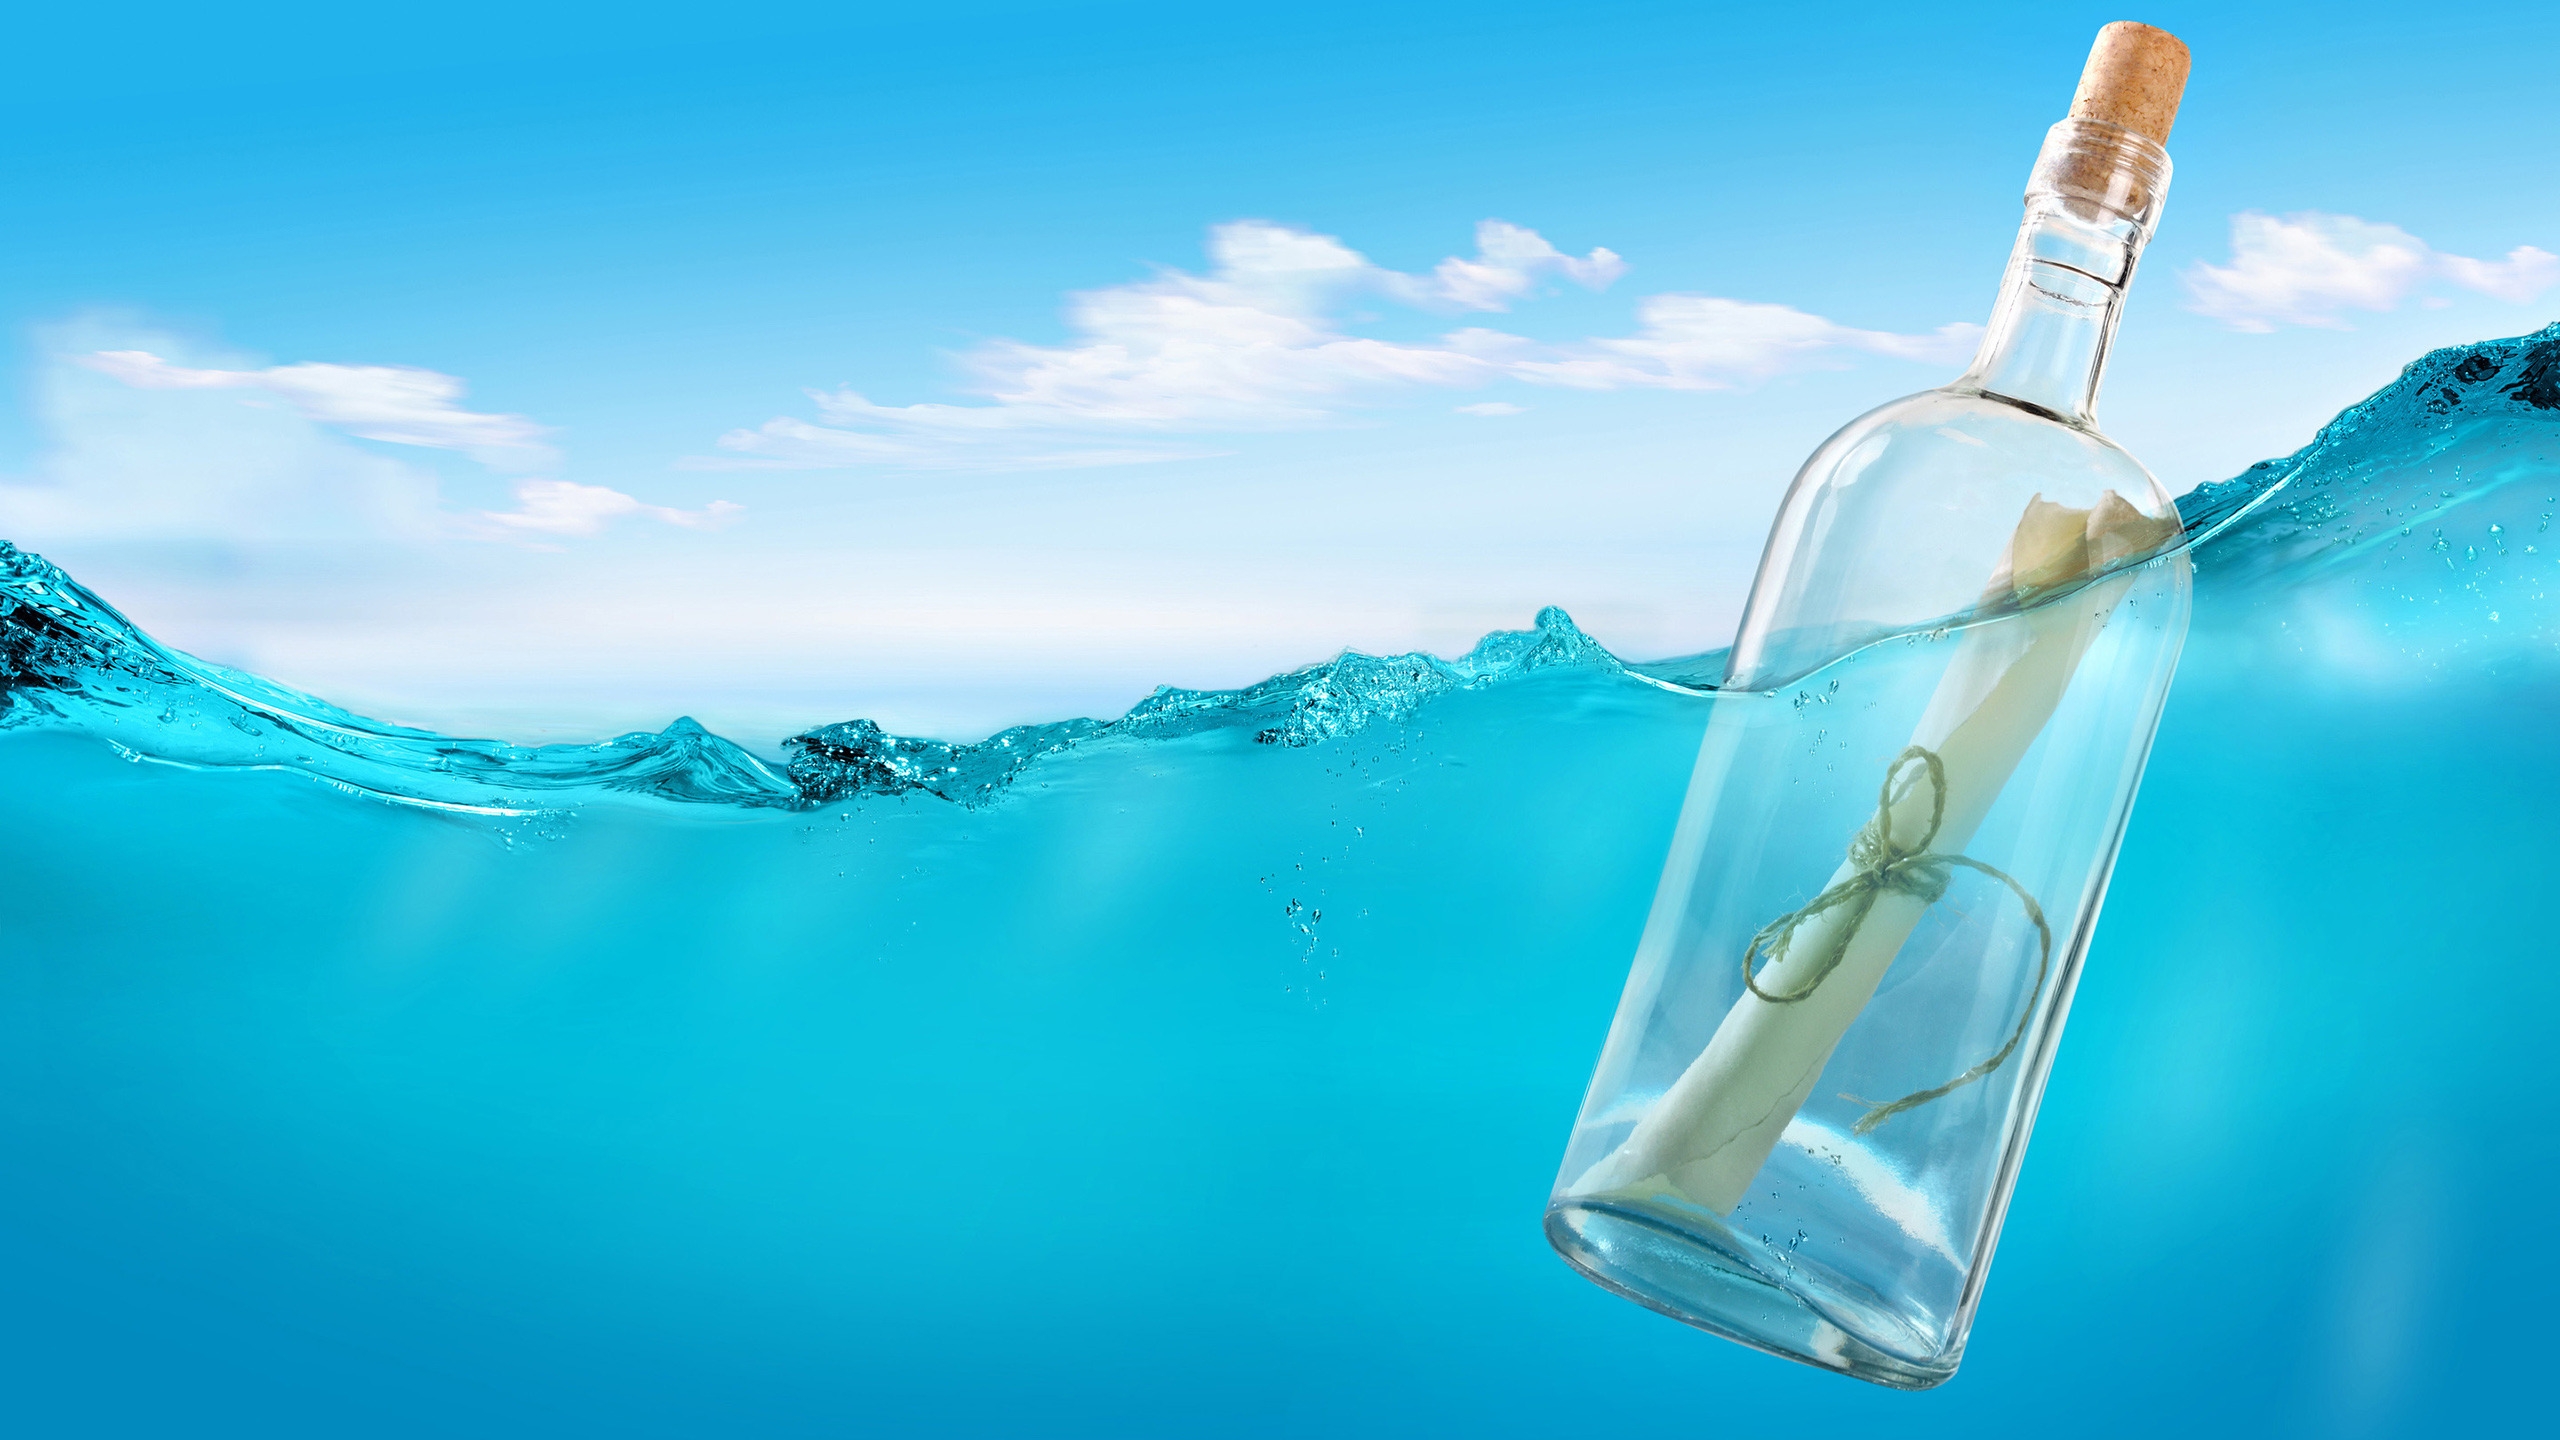 Message in a Bottle for 2560x1440 HDTV resolution